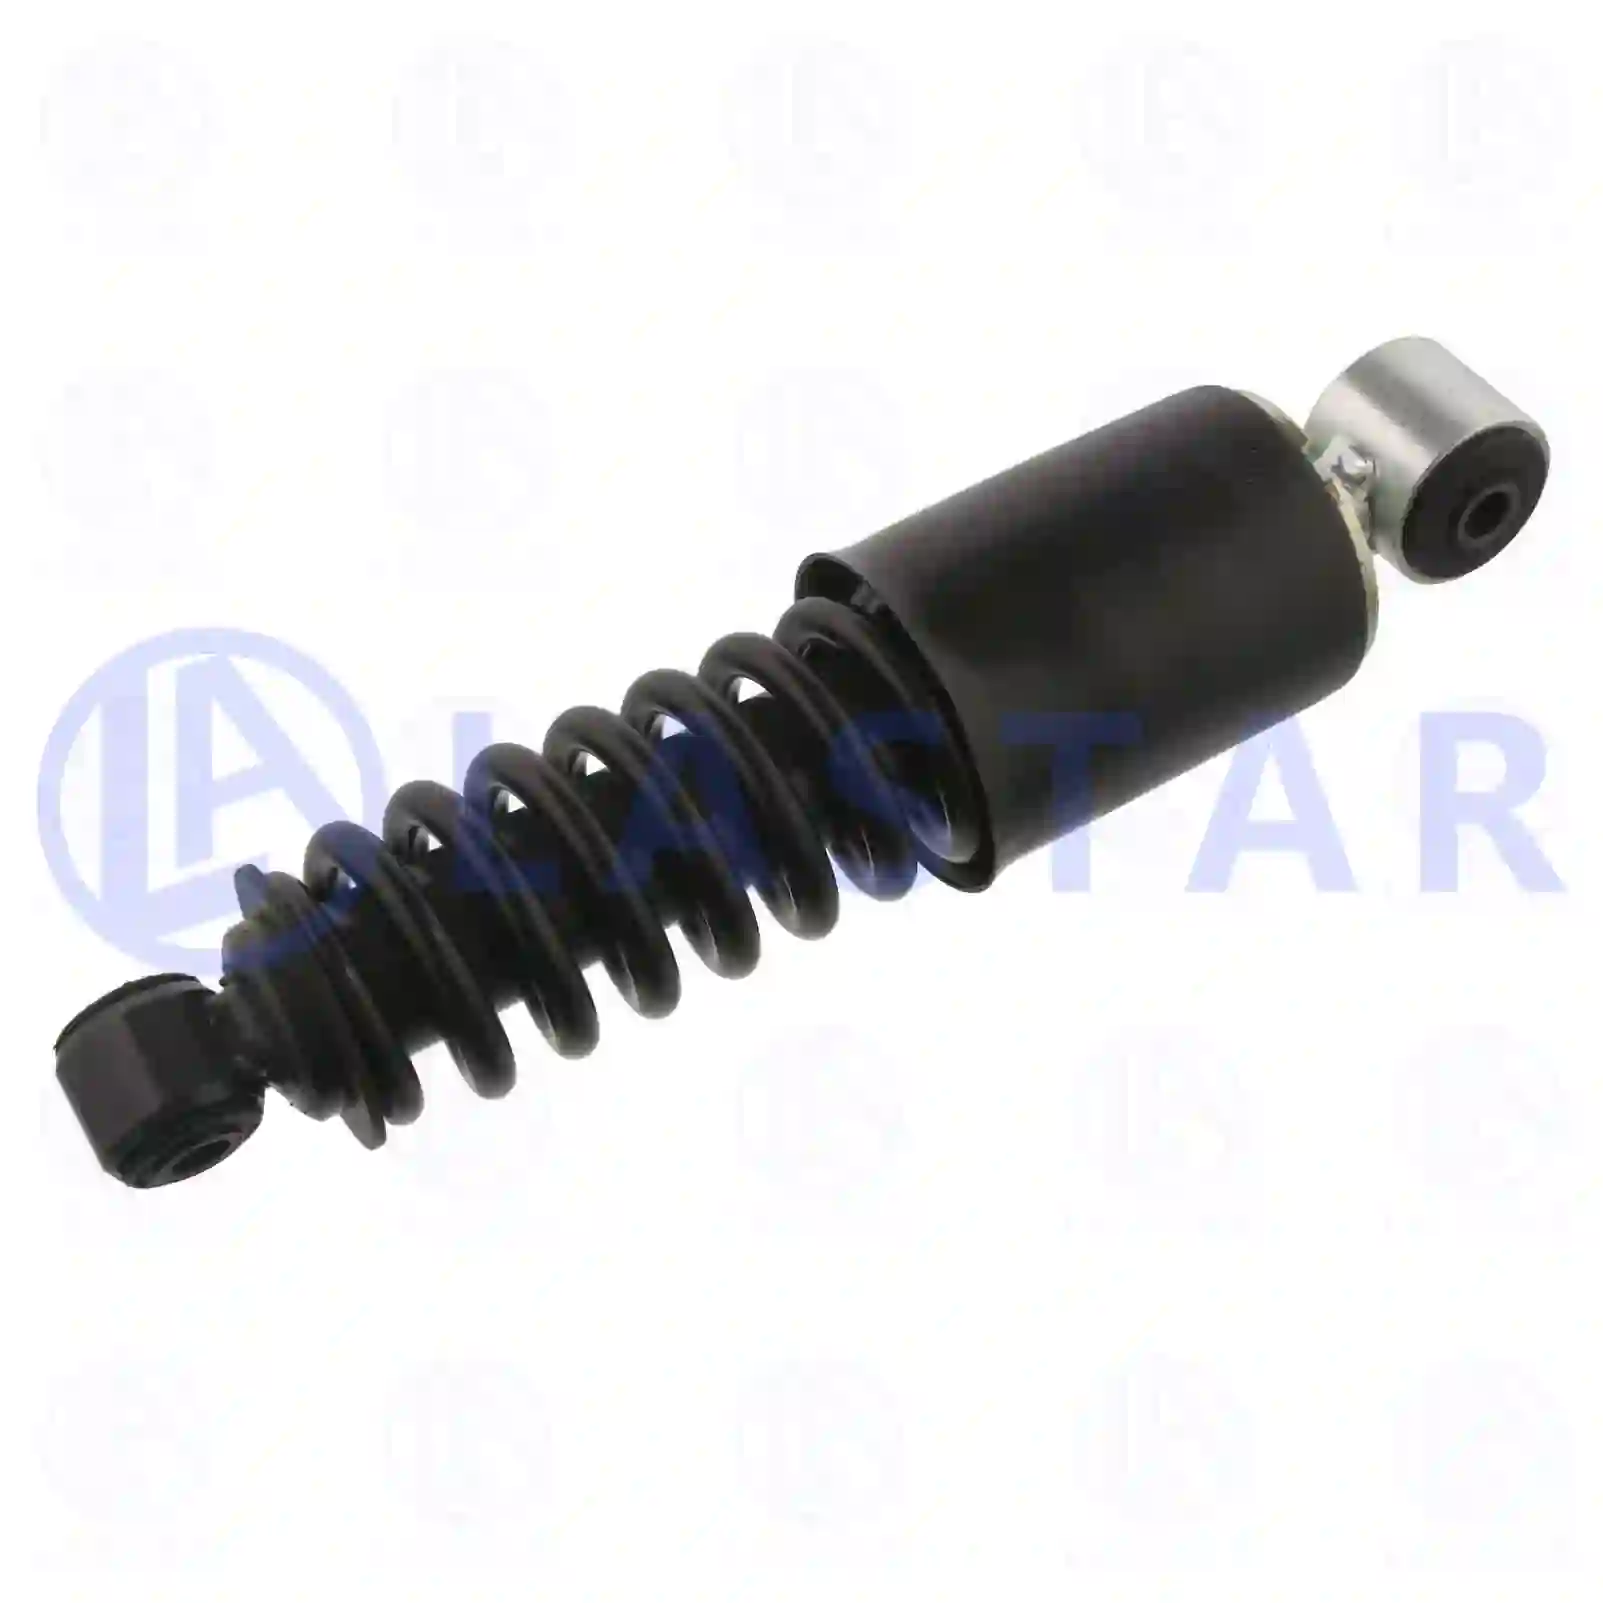 Cabin shock absorber, 77734871, 3758900819, 6938900519, 9408903719, 9408904519, 9408904619, 9583171503 ||  77734871 Lastar Spare Part | Truck Spare Parts, Auotomotive Spare Parts Cabin shock absorber, 77734871, 3758900819, 6938900519, 9408903719, 9408904519, 9408904619, 9583171503 ||  77734871 Lastar Spare Part | Truck Spare Parts, Auotomotive Spare Parts